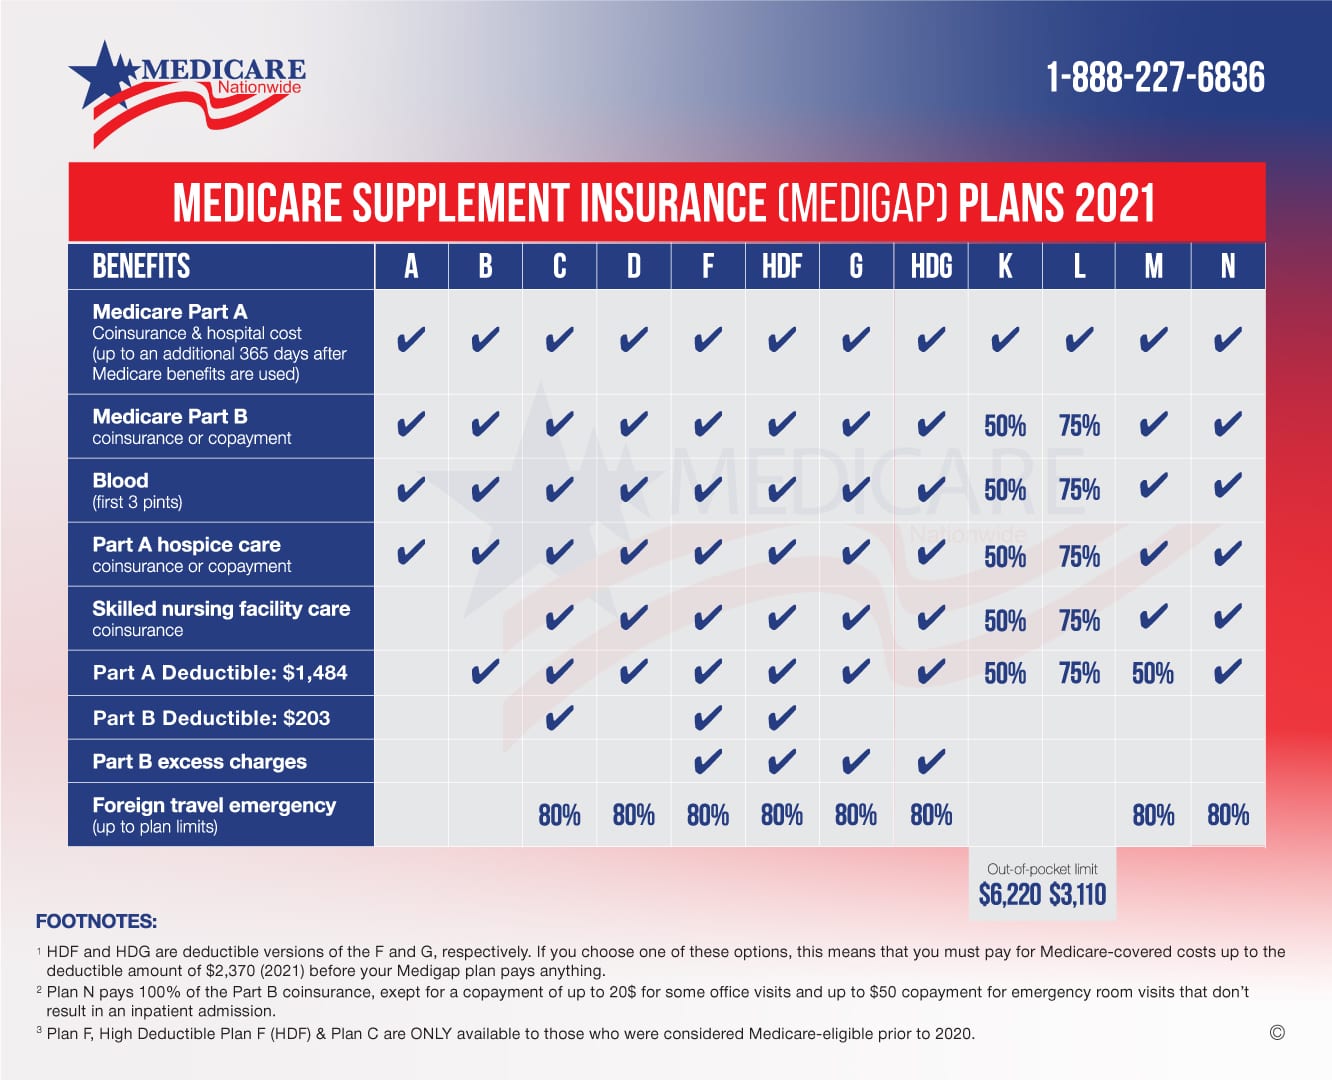 What You Should Know About Medicare Supplement Plans - Considerable